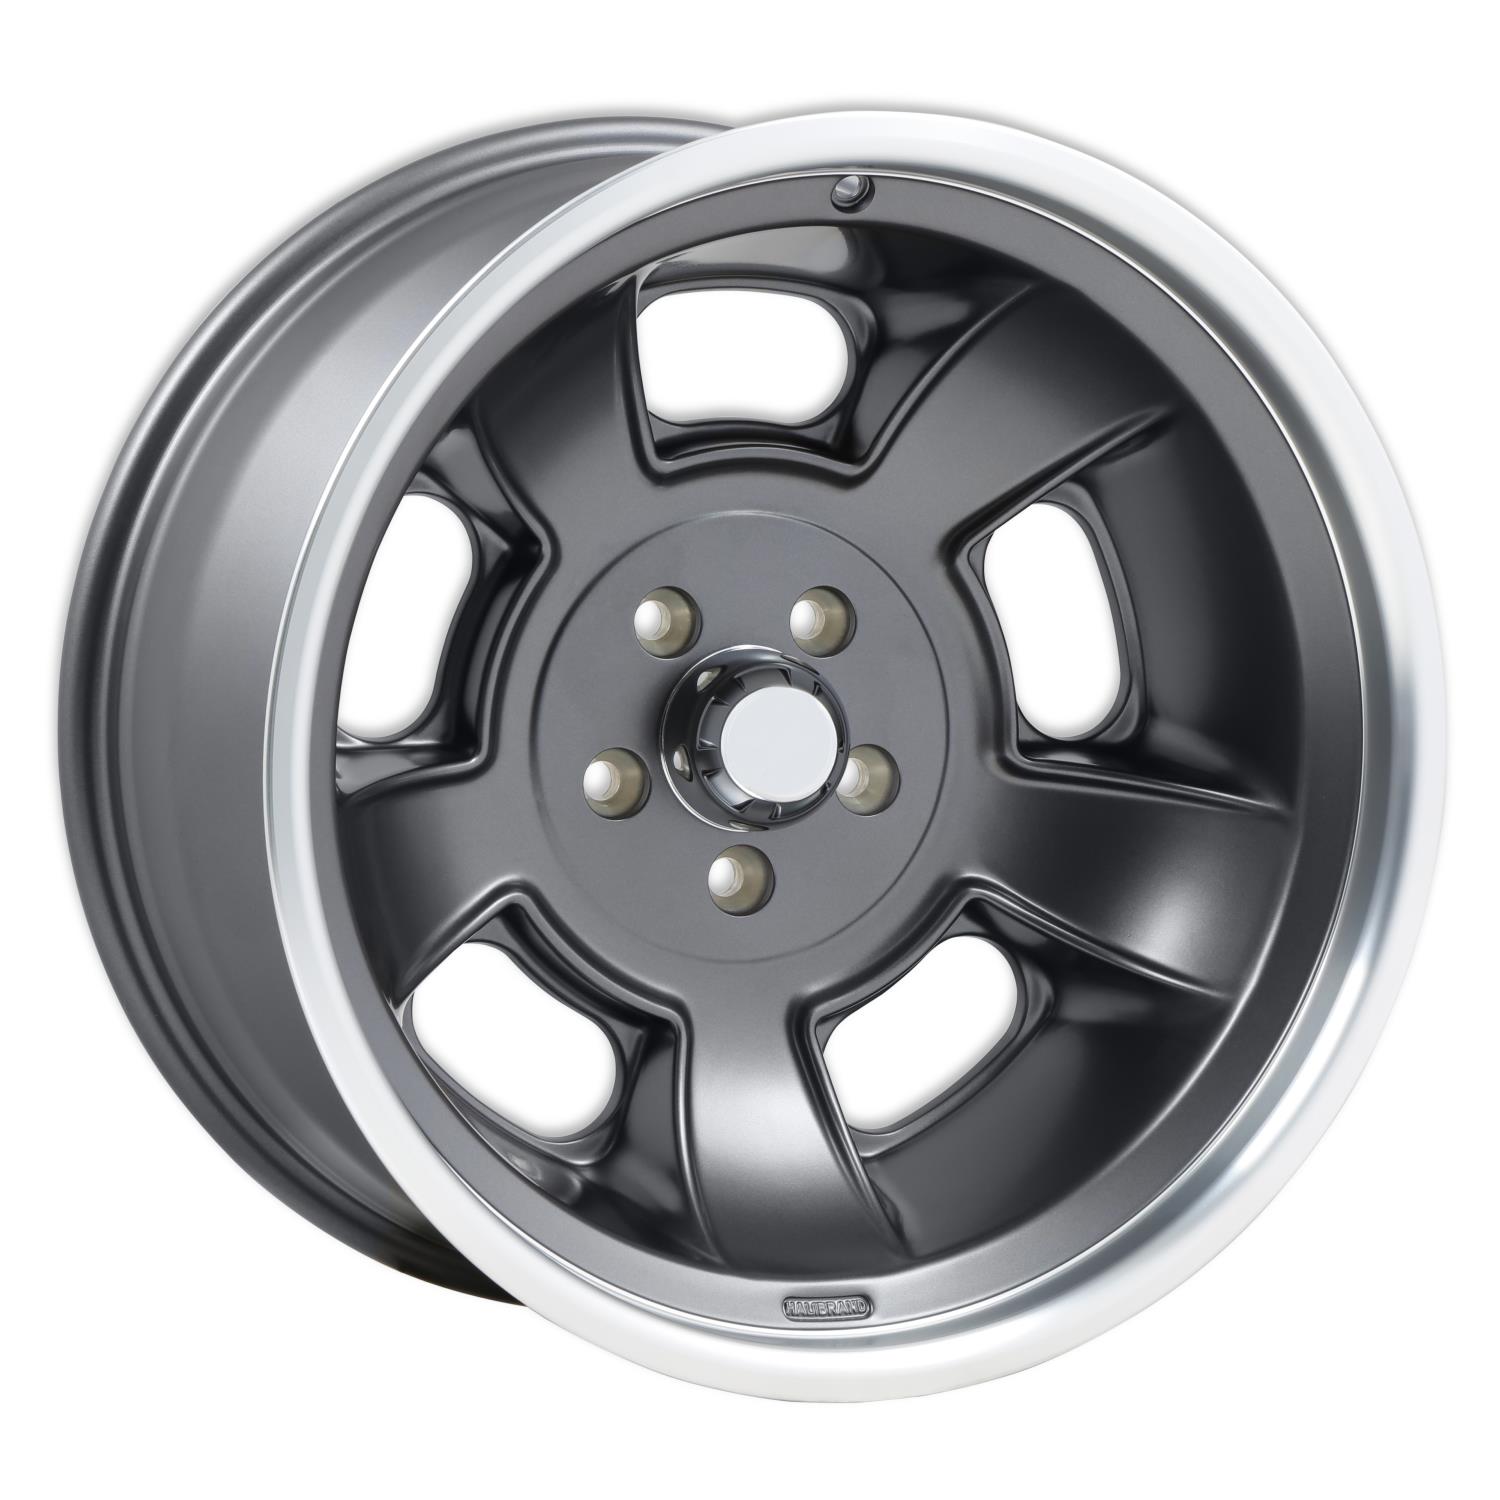 Sprint Rear Wheel, Size: 20x10", Bolt Pattern: 5x5", Backspace: 4" [Anthracite with Machined Lip - Semi Gloss Clearcoat]